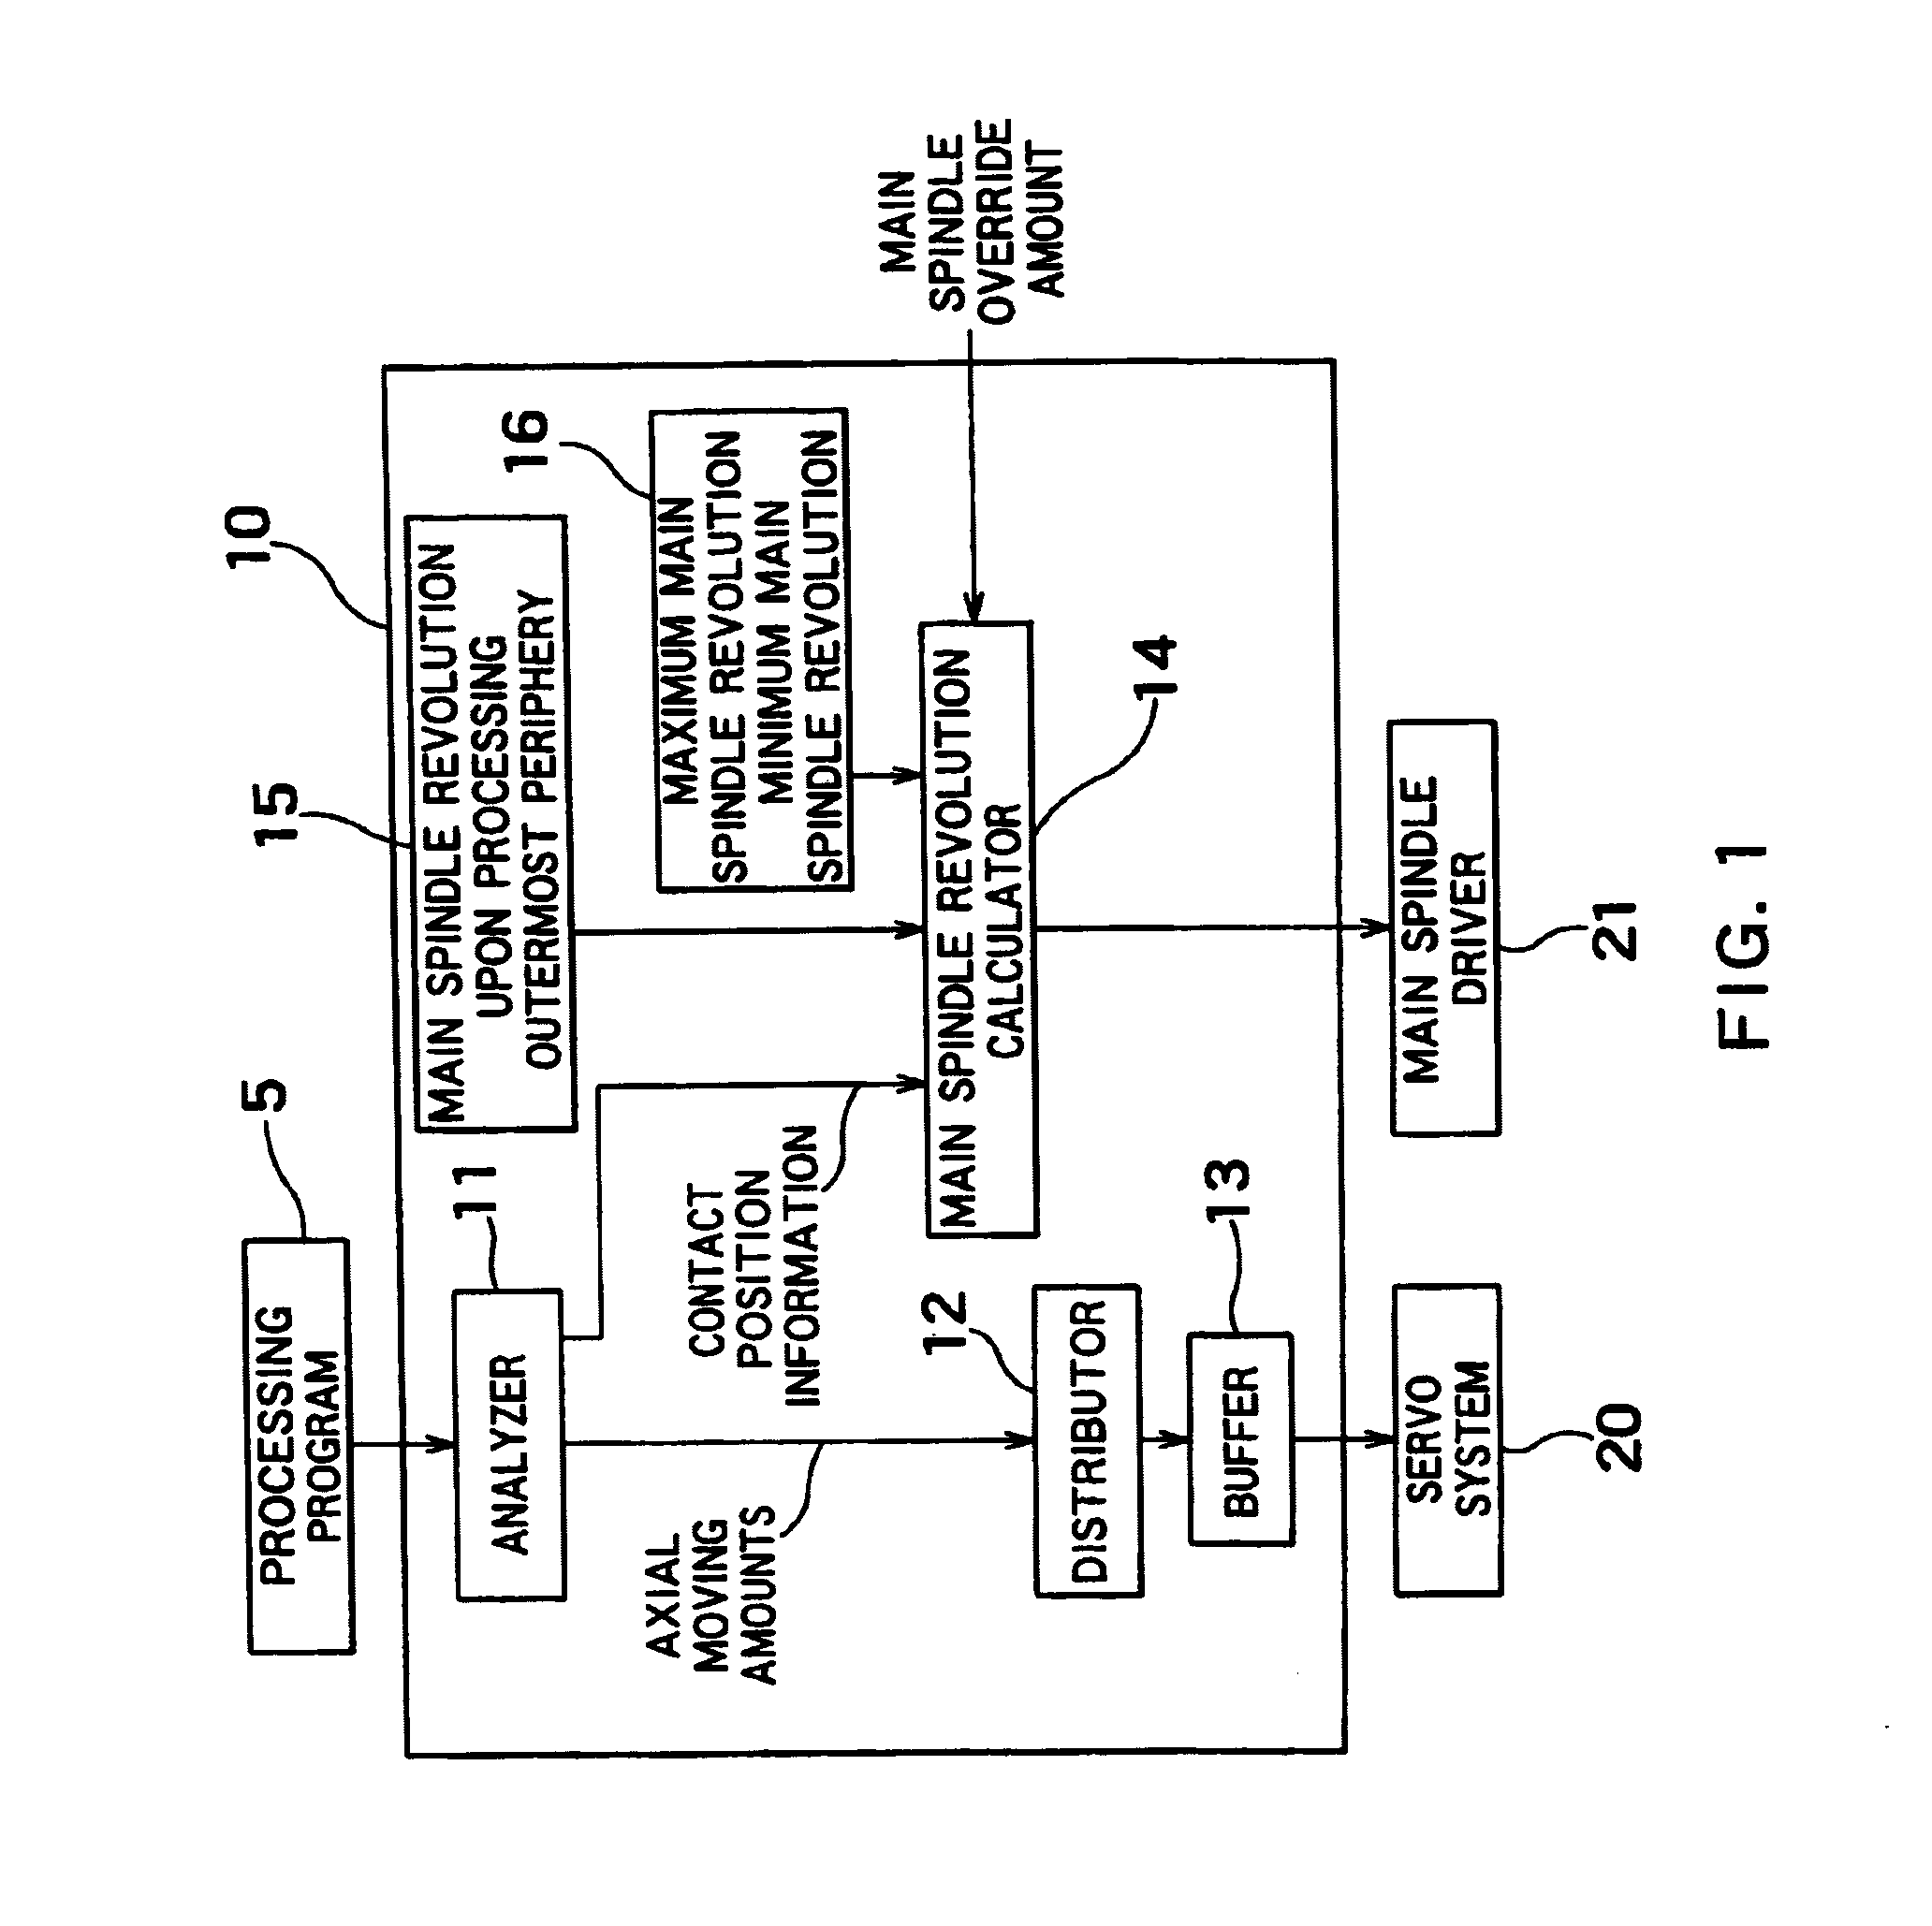 Numerical control apparatus and CAM system